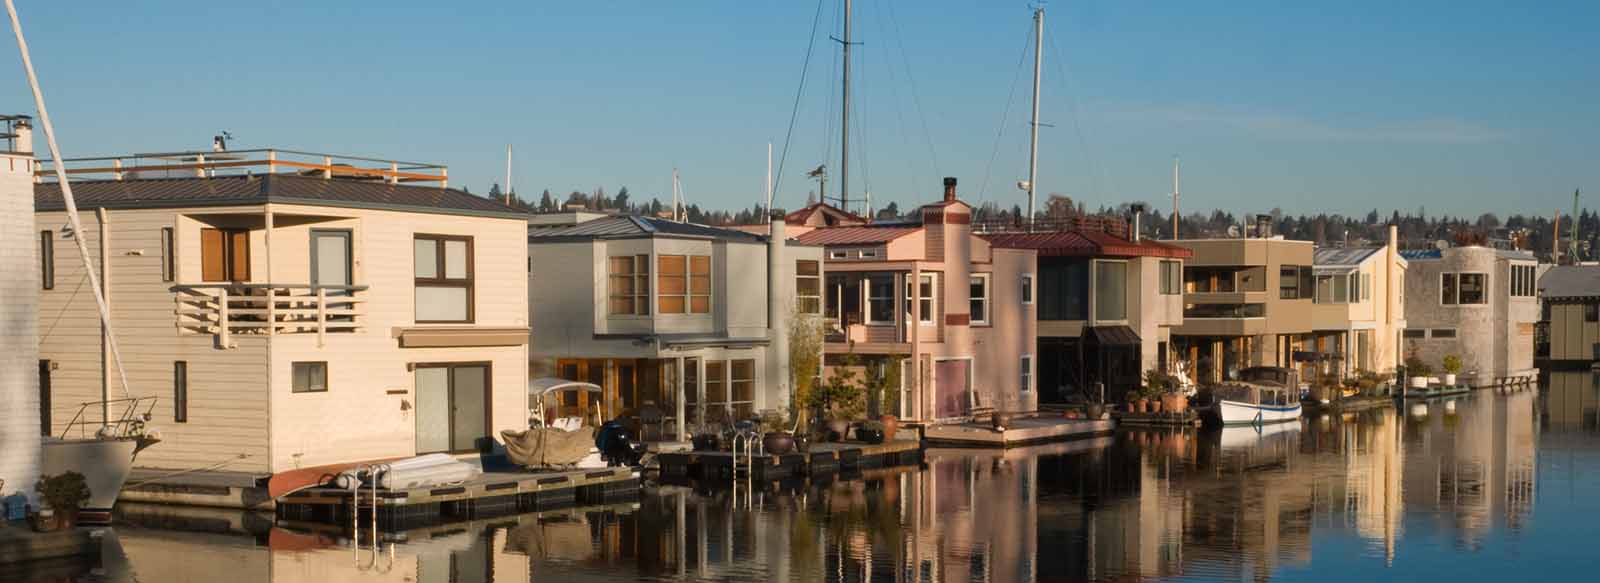 A community of floating homes